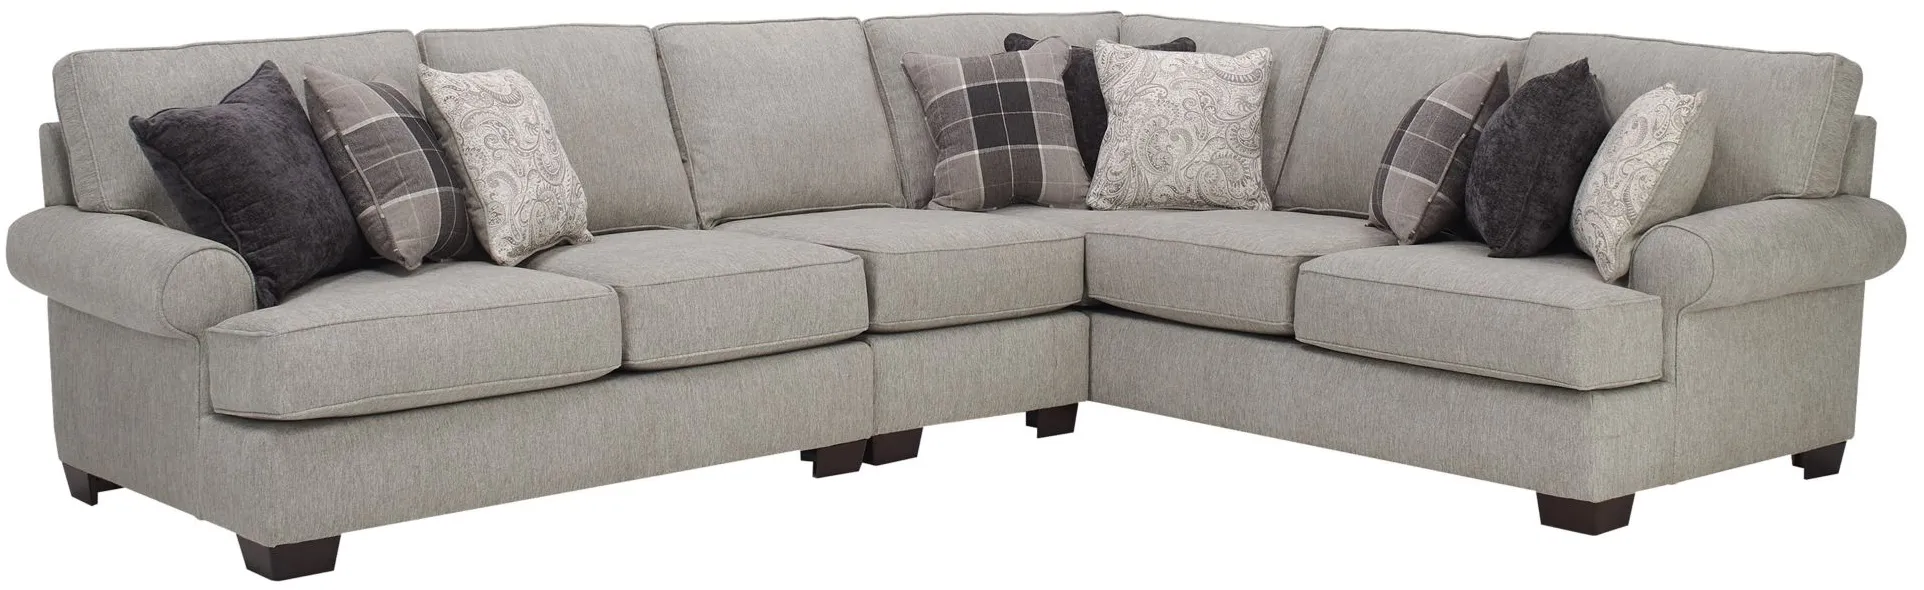 Overton 3-pc. Sectional in Gray by Alan White